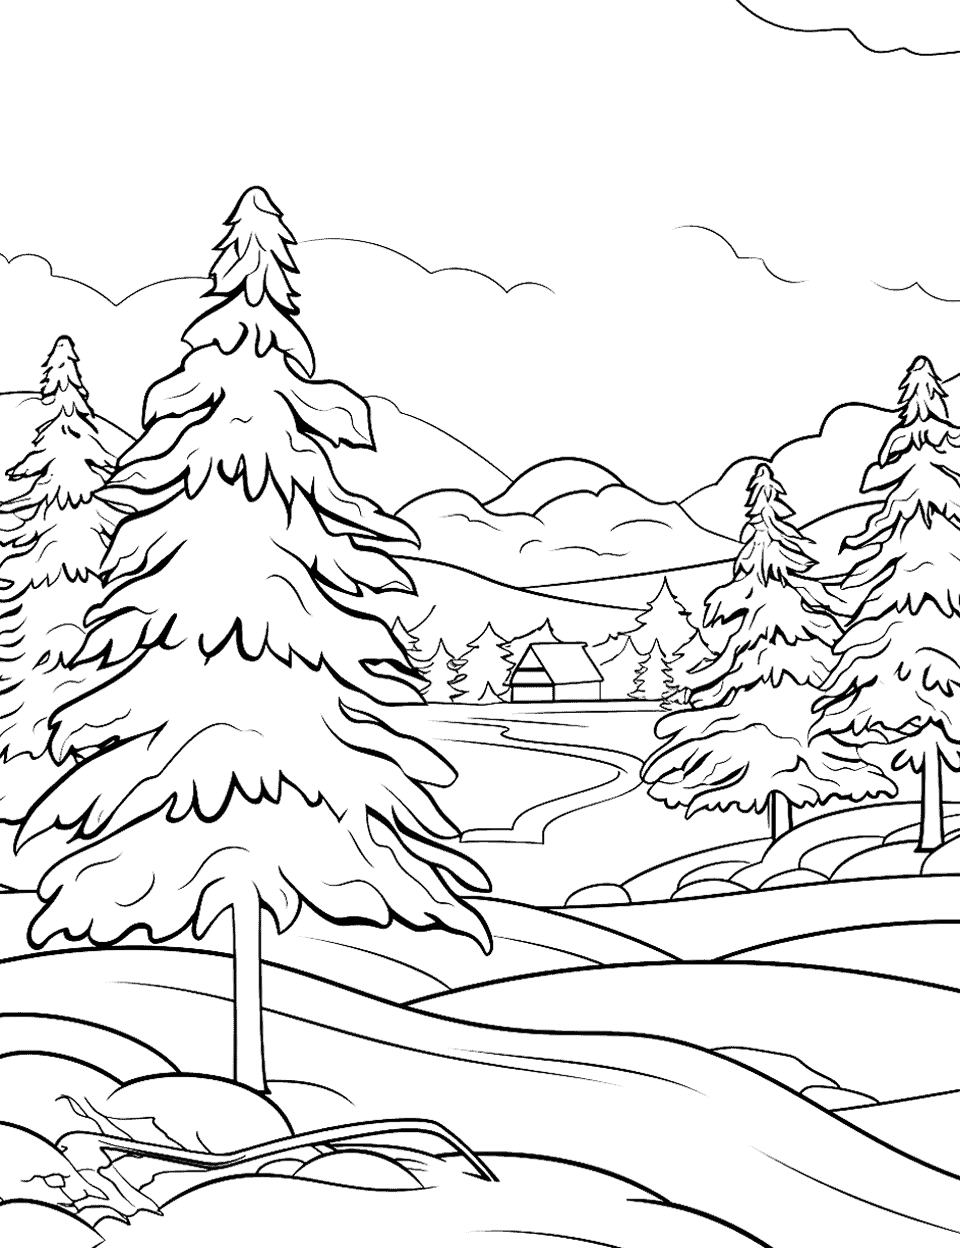 Frosty Morning Christmas Coloring Page - A beautiful, frosty morning with ice crystals on the trees and snow on the ground.